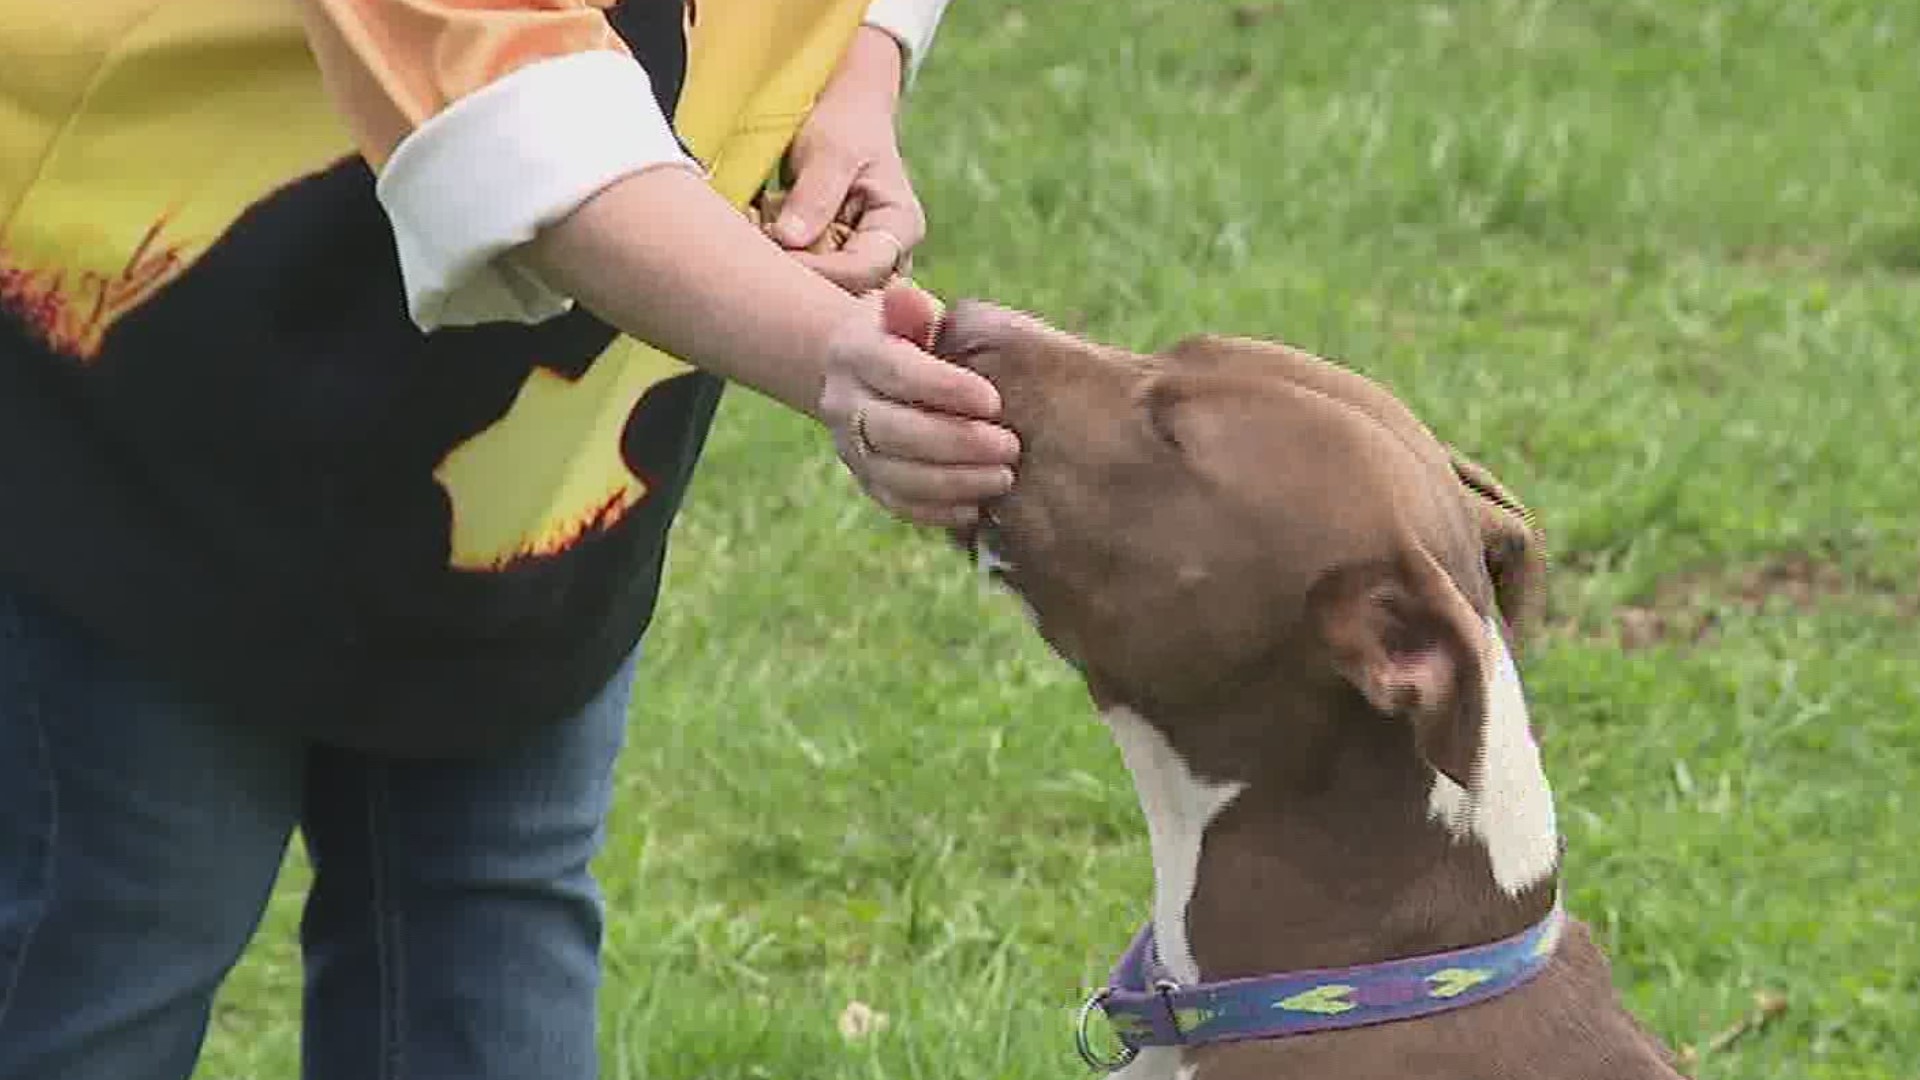 In this week's 16 To The Rescue we take you to a rescue in Columbia County that specializes in adopting out dogs to veterans, as well as families.